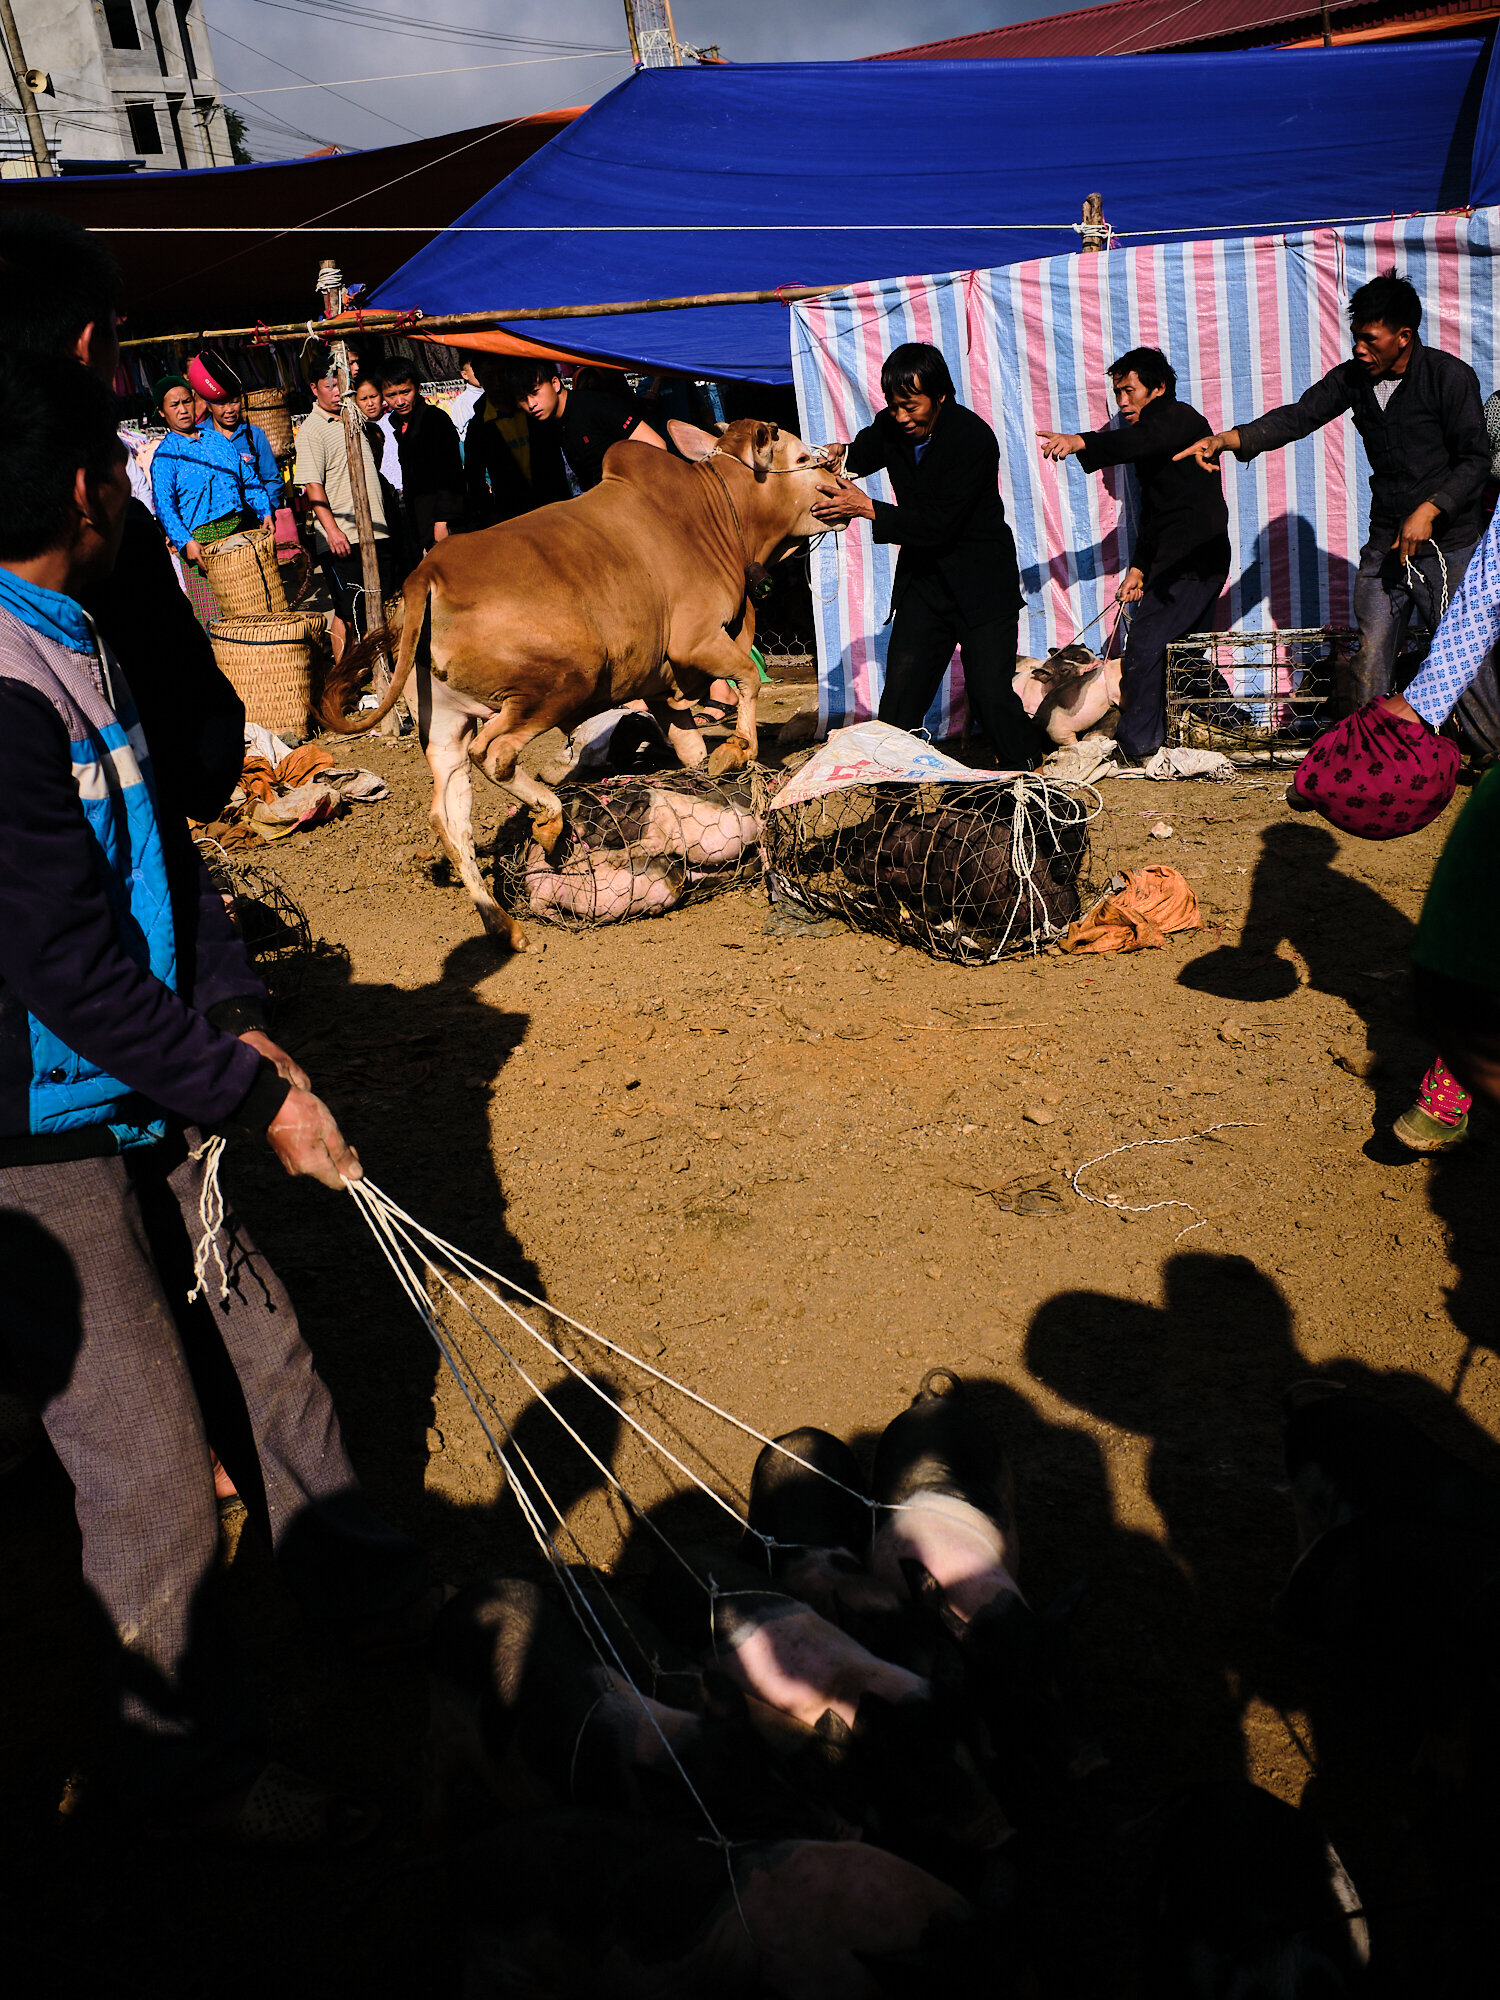  Villagers trying to control a raging bull at Dong van market in Vietnam 